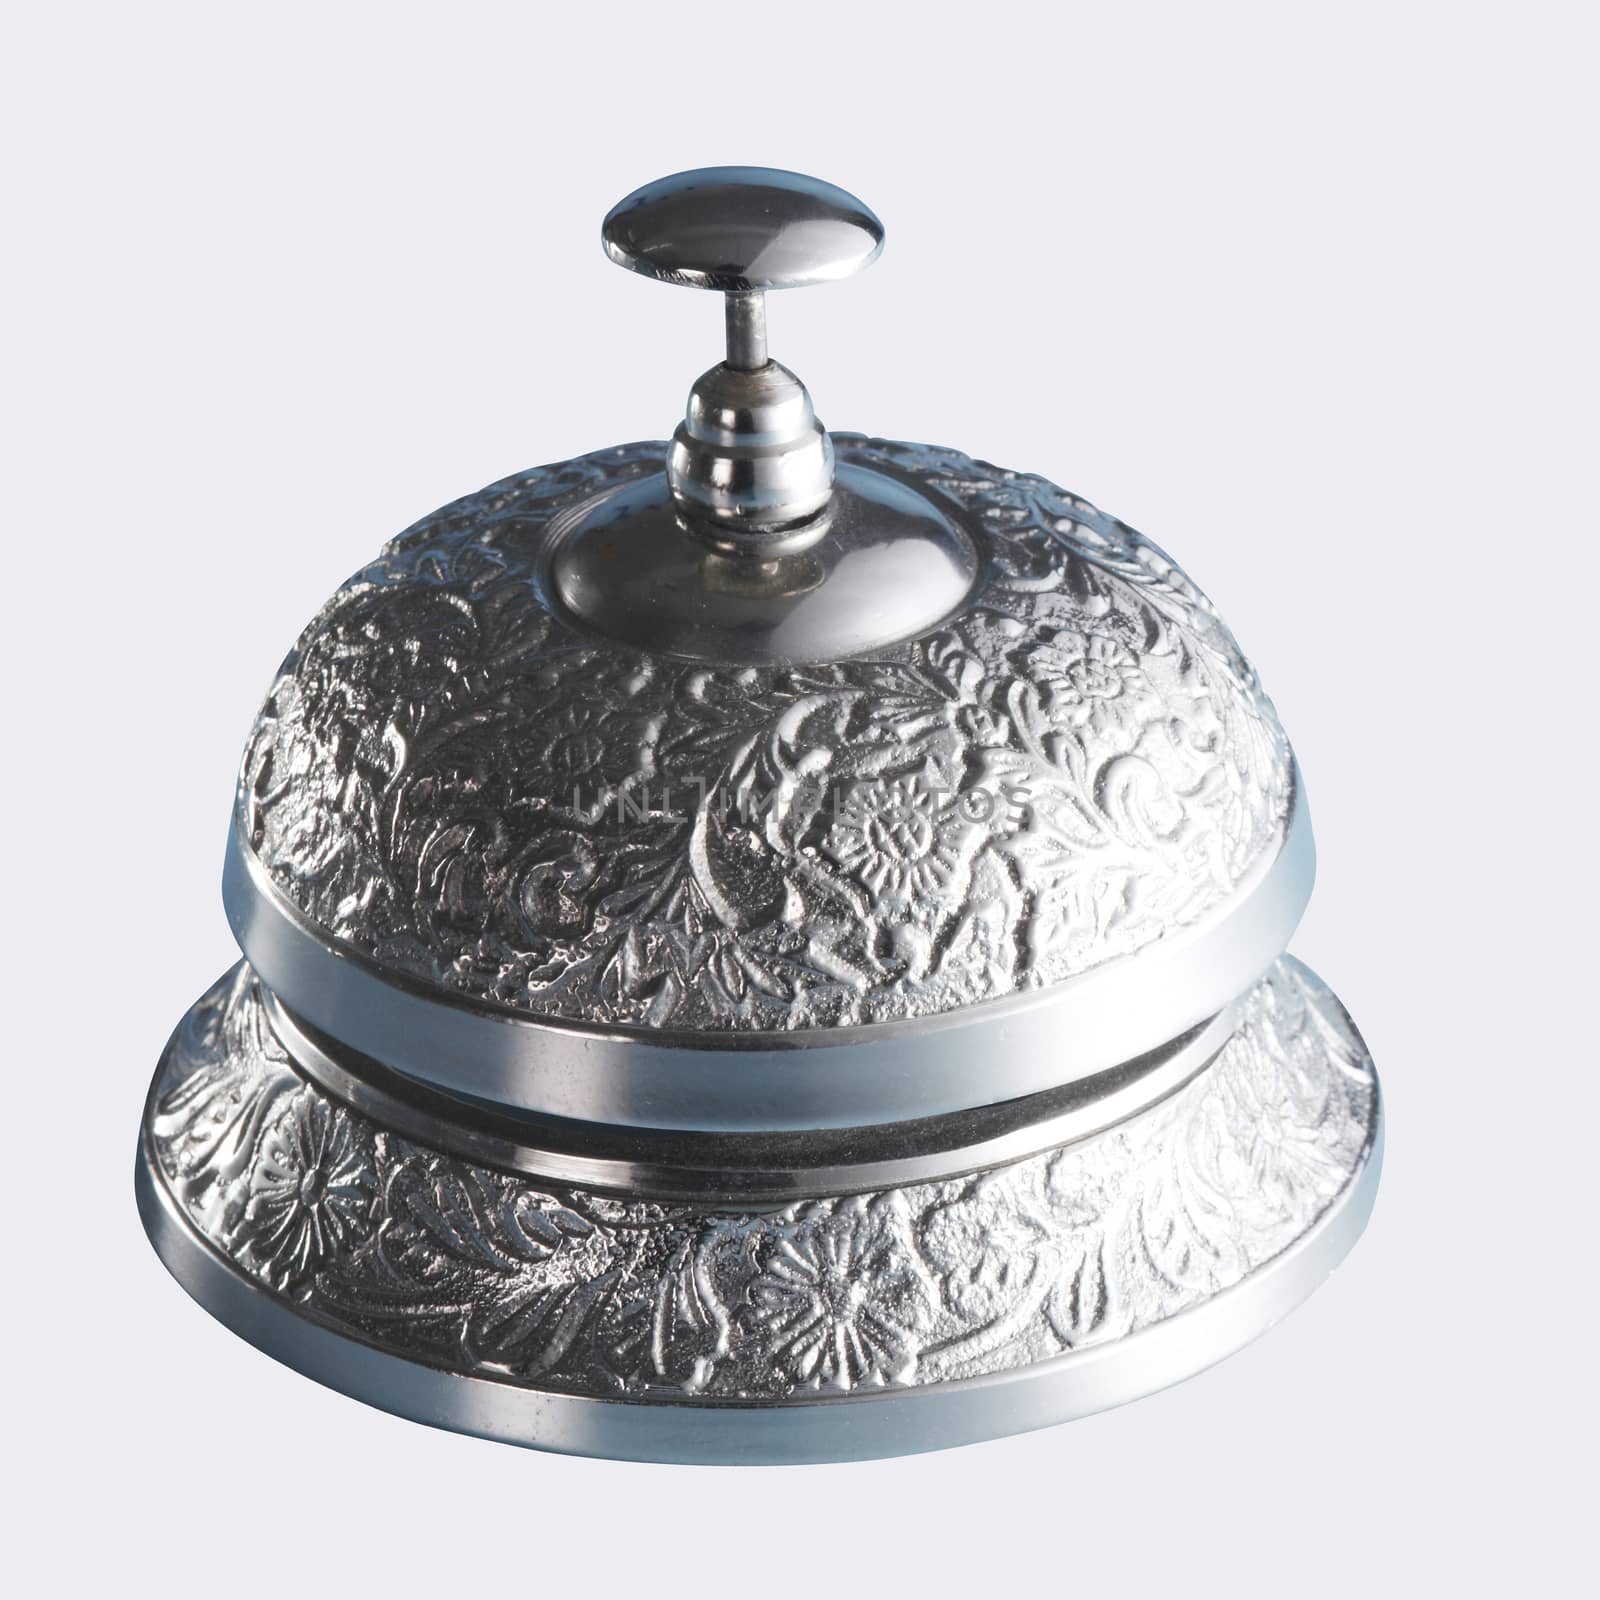 service bell with clipping path